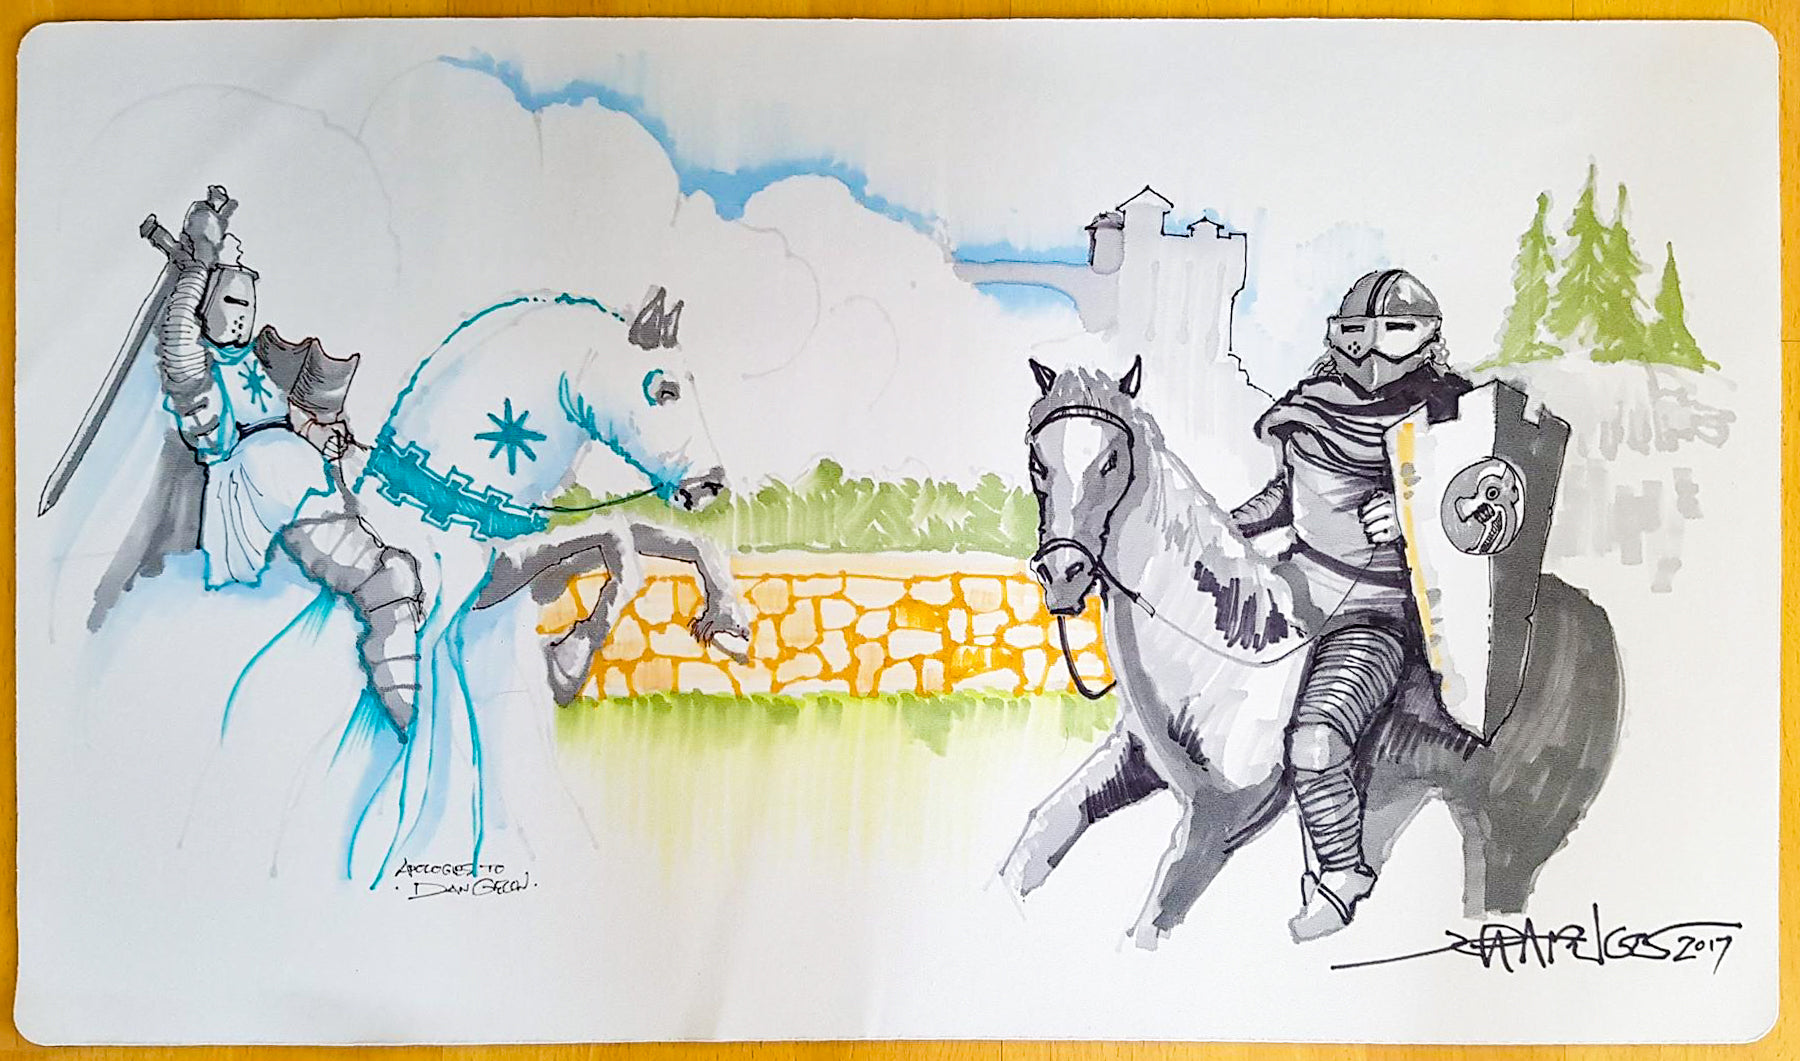 White Knight & Black Knight [Version 2] - Jeff A. Menges - Hand Drawn - Signed by the Artist - MTG Playmat